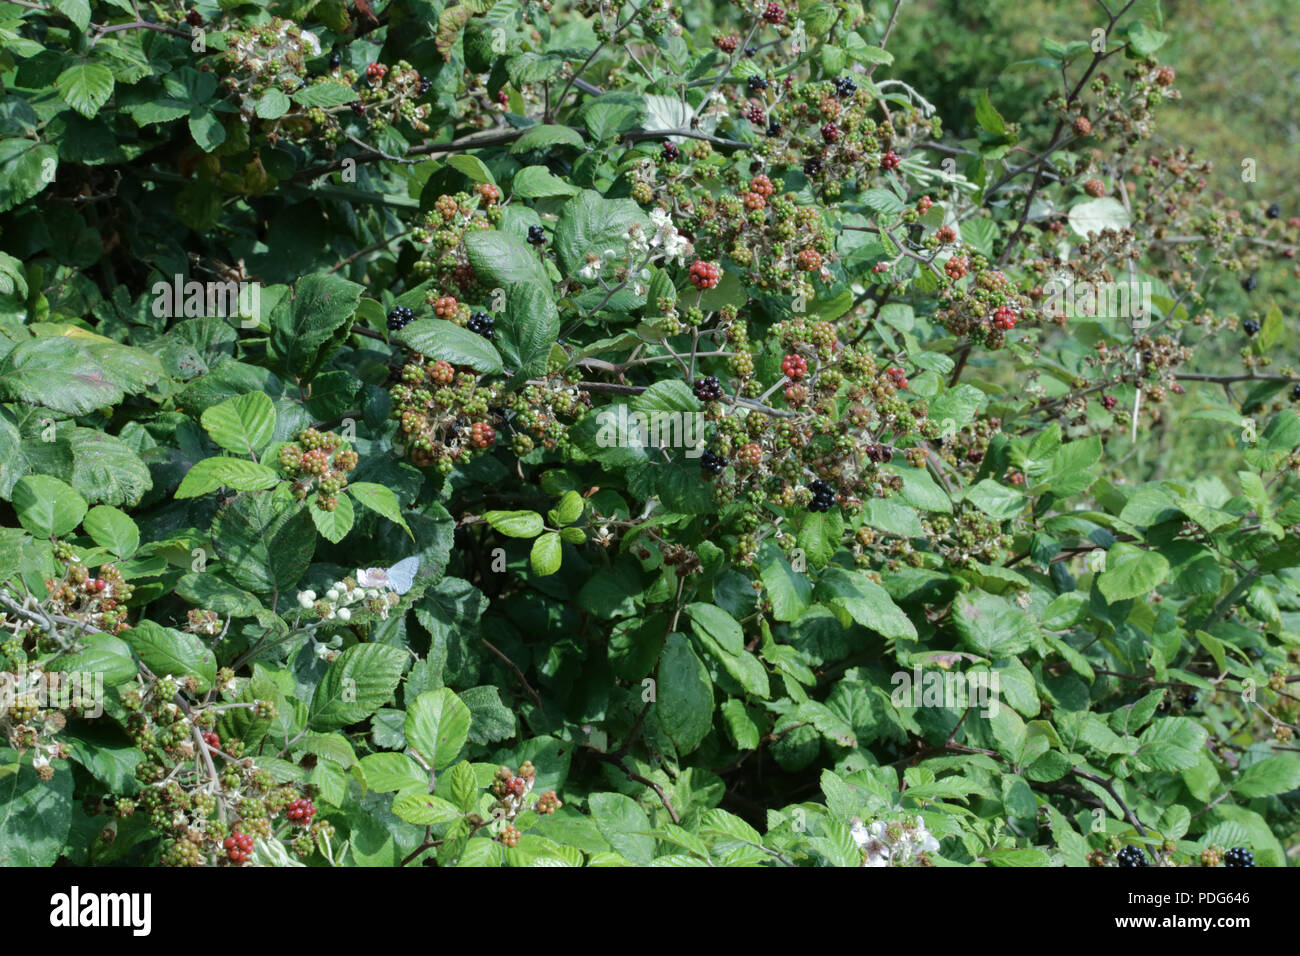 Busy green Hedgerow  of blackberry plants Stock Photo